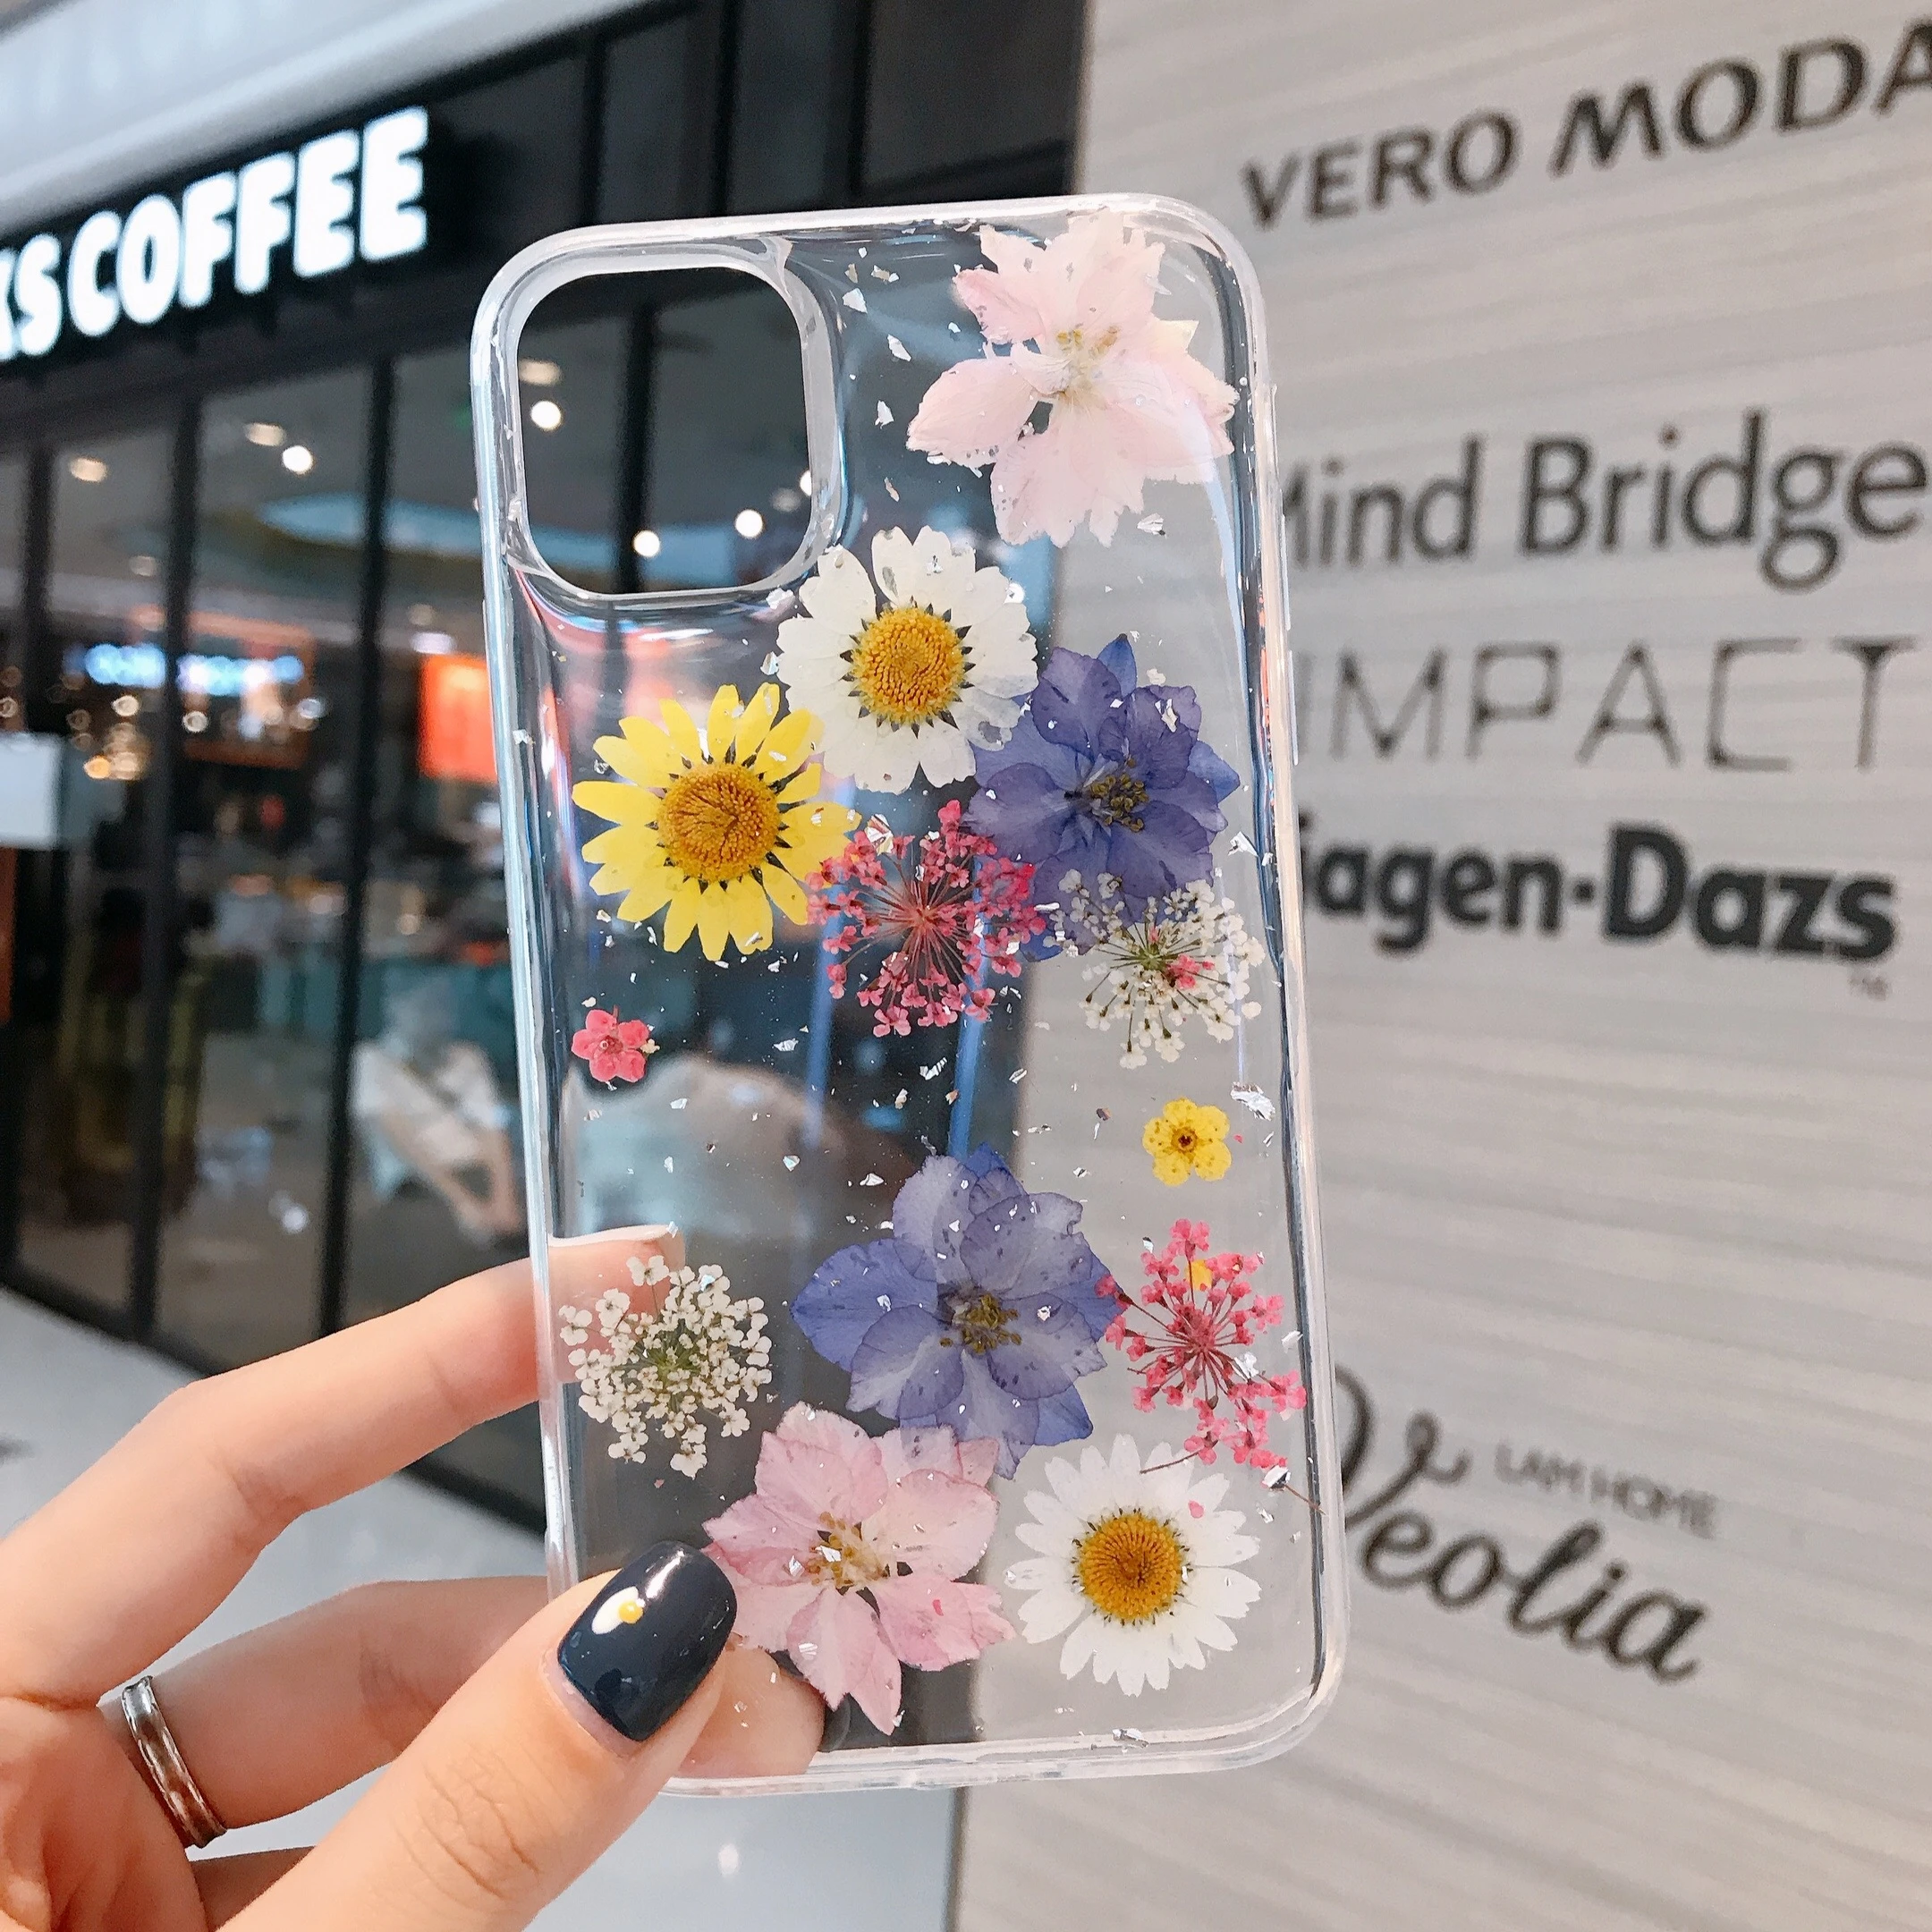 Real Dry Flower Glitter Phone Case on For iphone 11 12 Pro MAX 12 Mini XR X XS MAX 8 7 Plus SE 2020 Clear Soft Silicone Cover iphone 8 plus silicone case